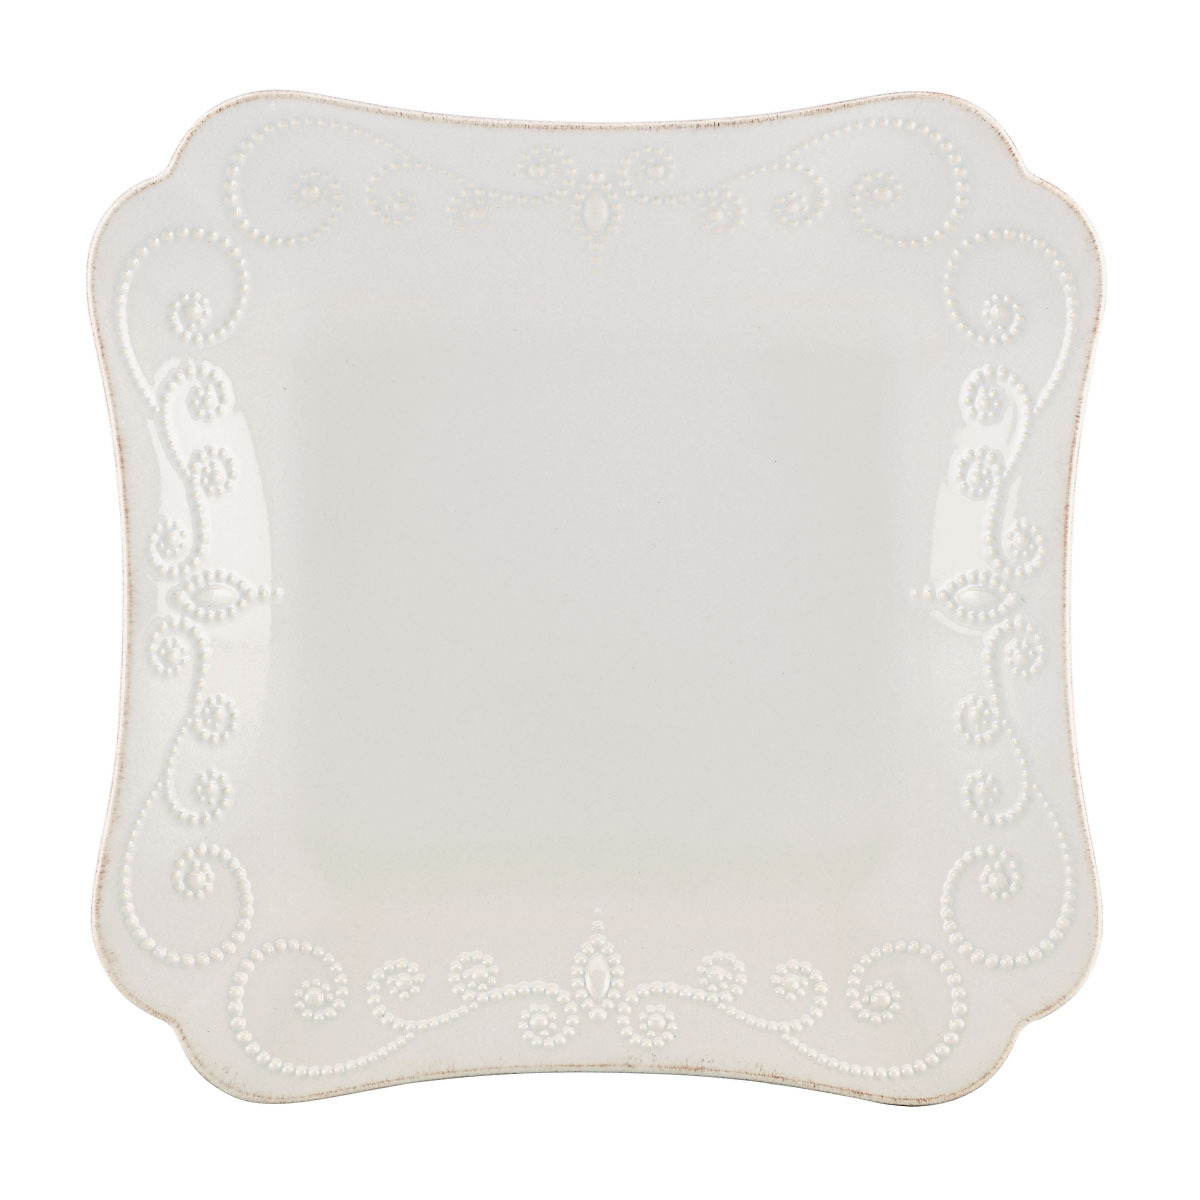 Lenox French Perle White China Square Dinner Plate, Single